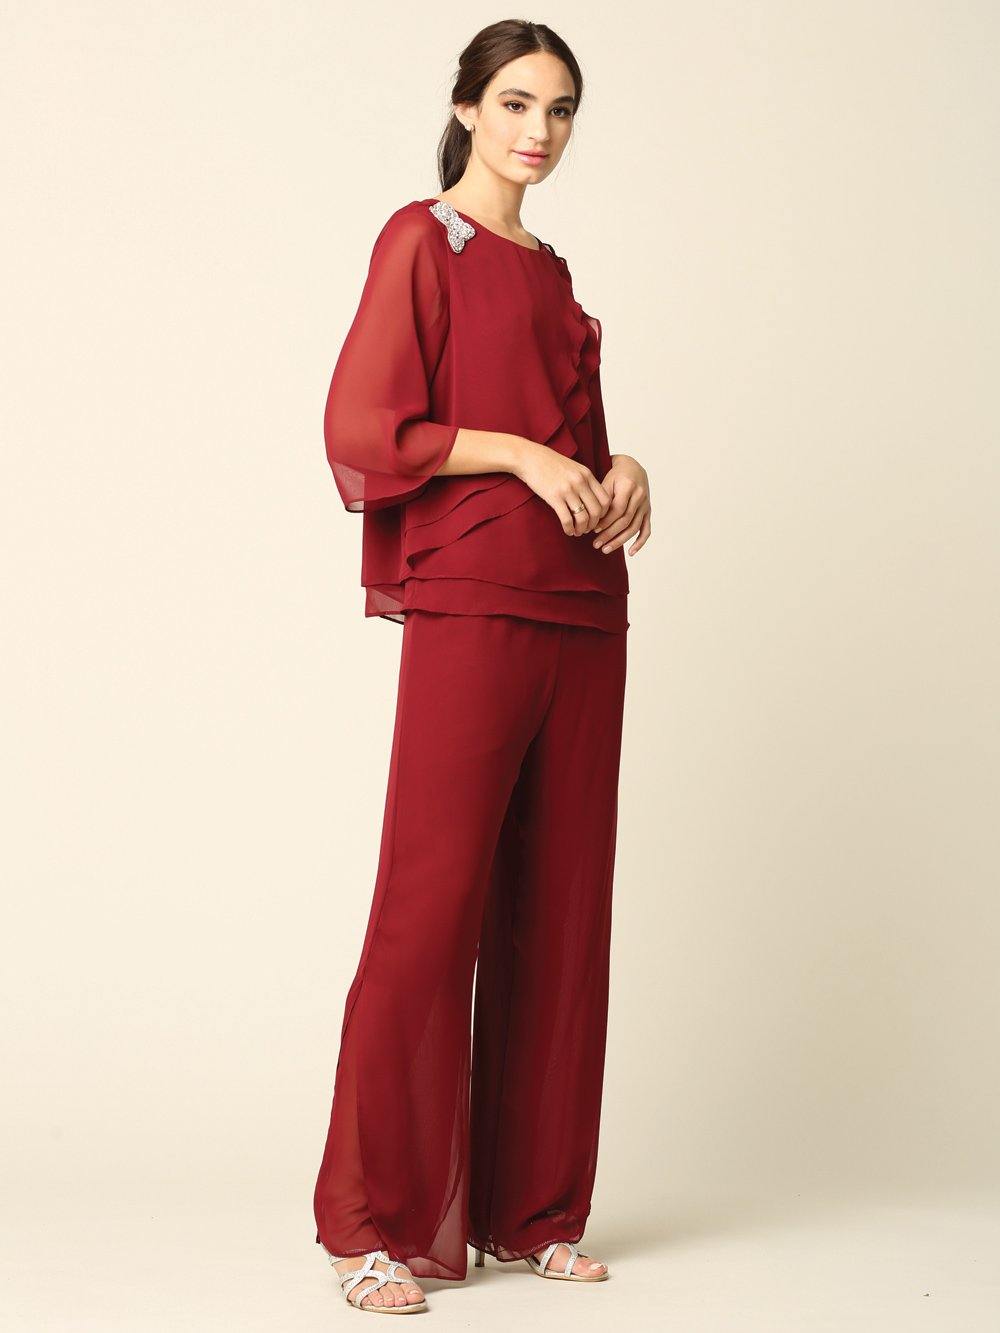 Formal Mother of the Bride Chiffon Pant Suit - The Dress Outlet Eva Fashion